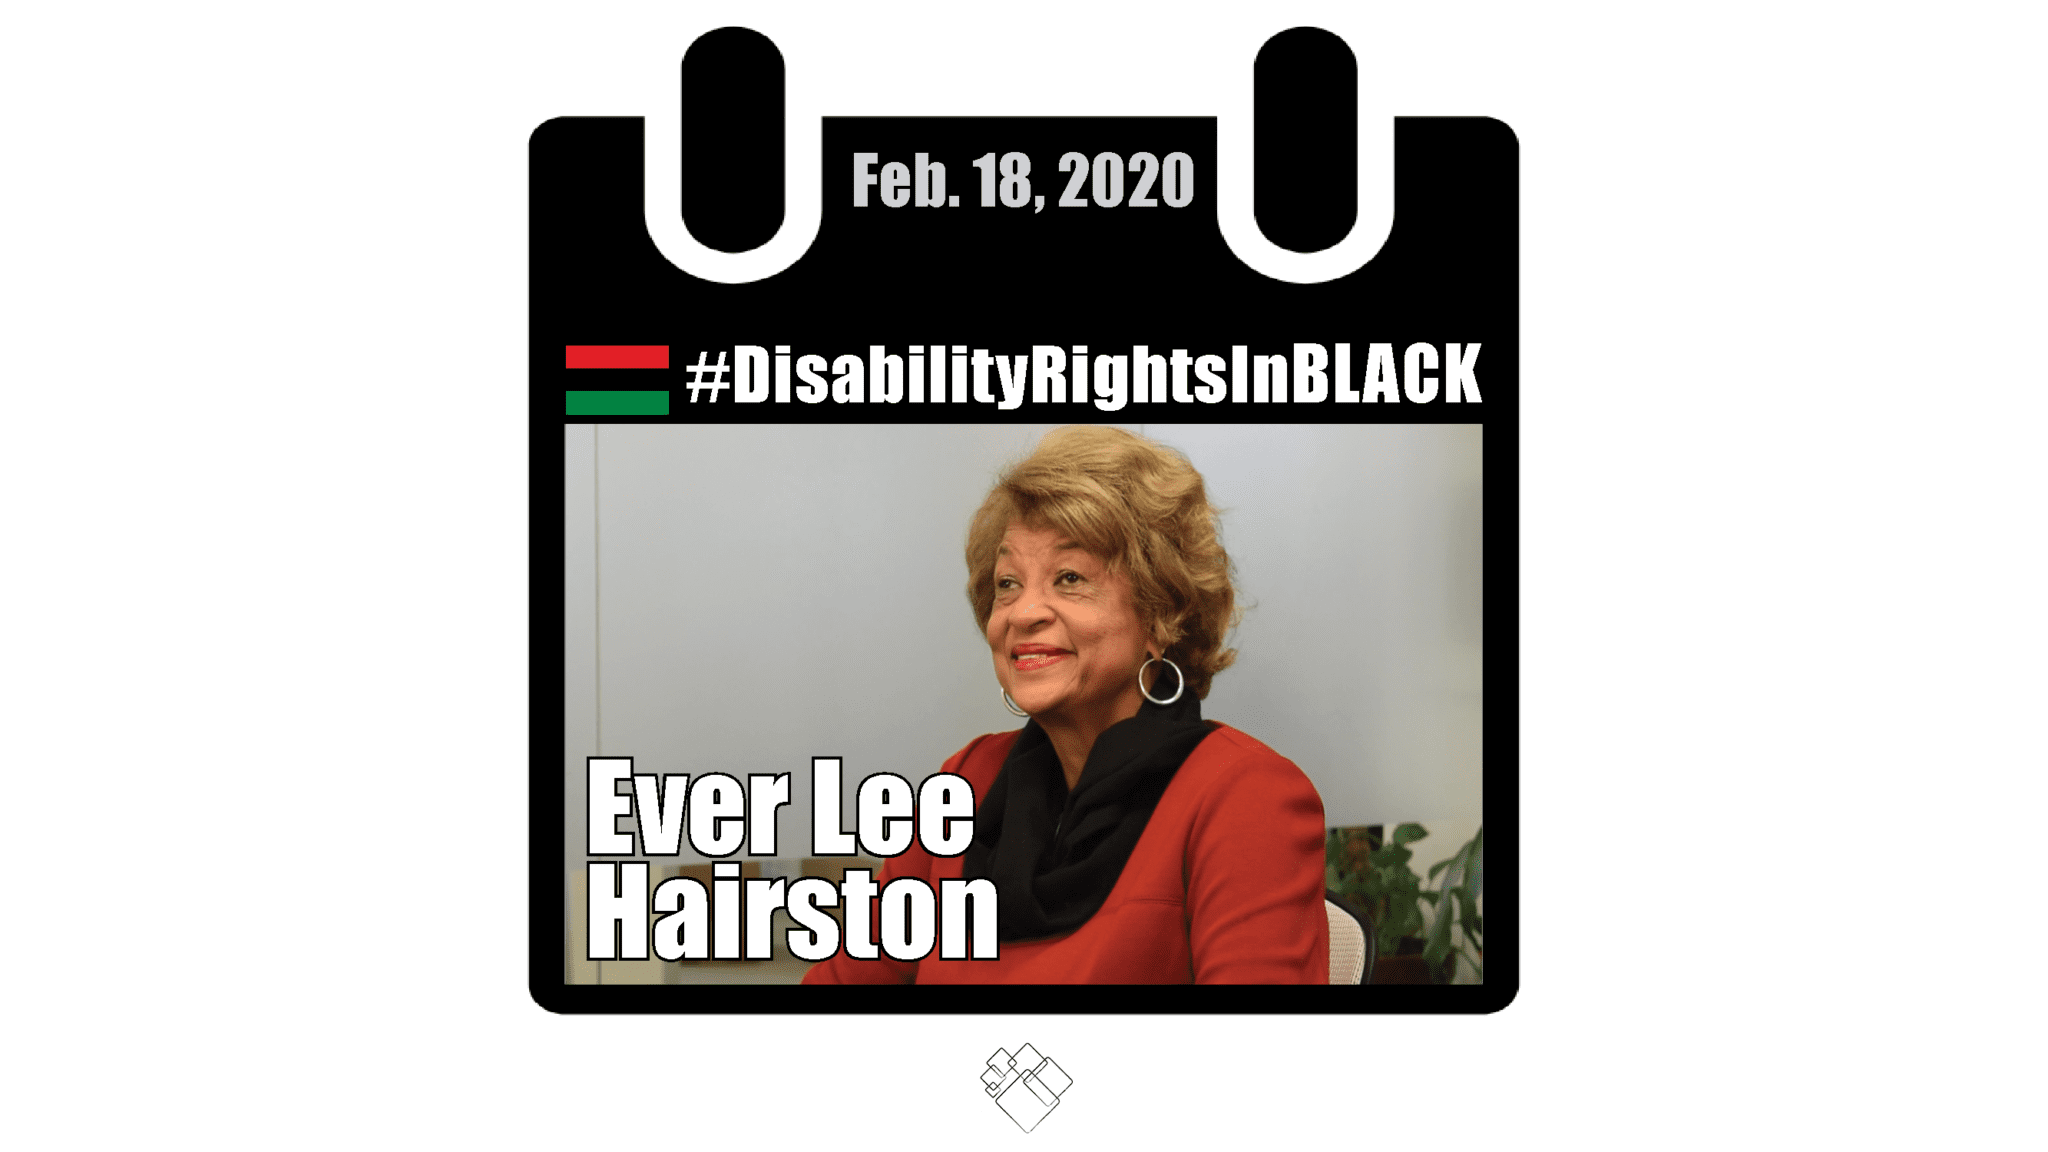 Ever Lee sits in a conference room and looks off screen and smiles. She is wearing a red top with a black scarf and silver hoop earrings. The Disability Rights in Black calendar style frame with the hashtag for the series at the top and the date, February 18, 2020.